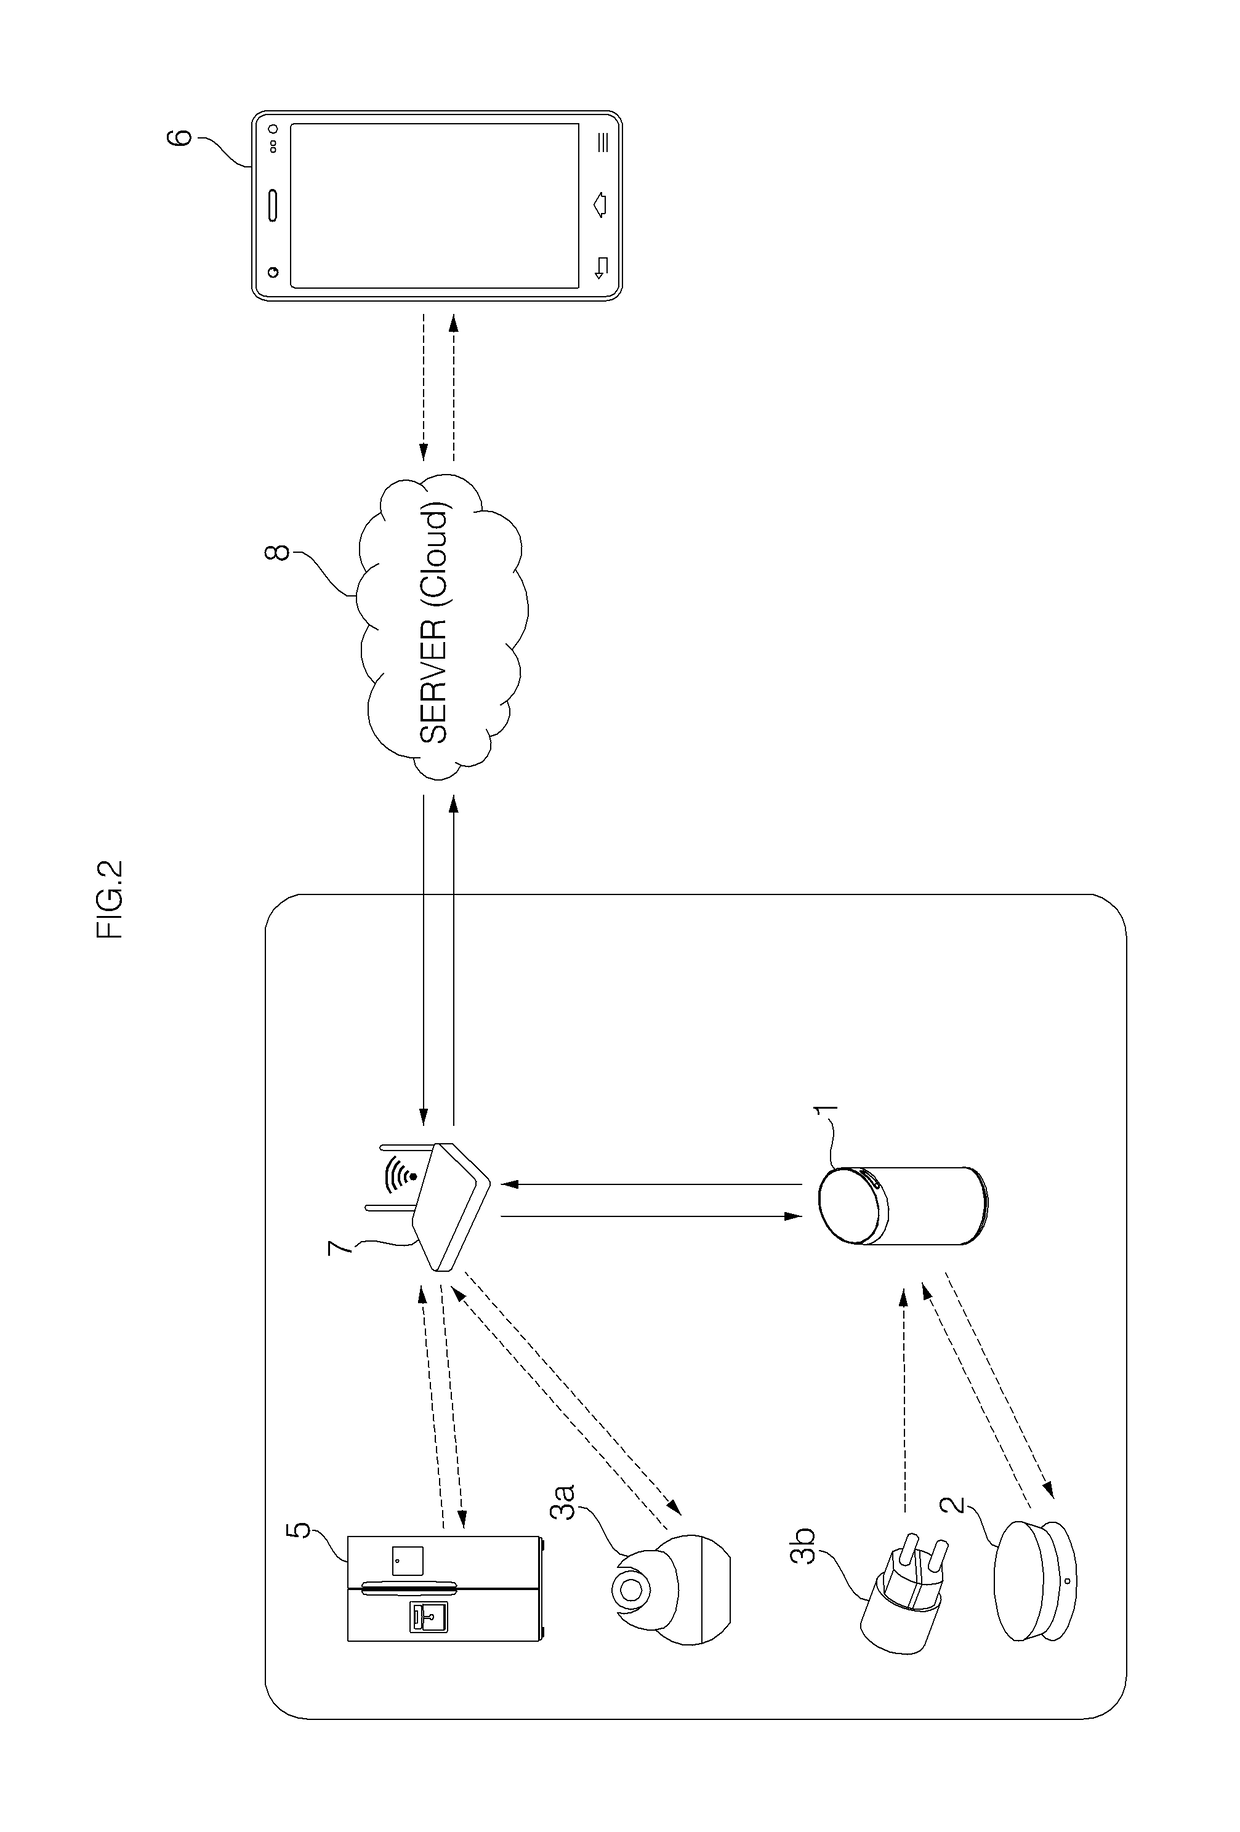 Voice recognition apparatus and voice recognition system